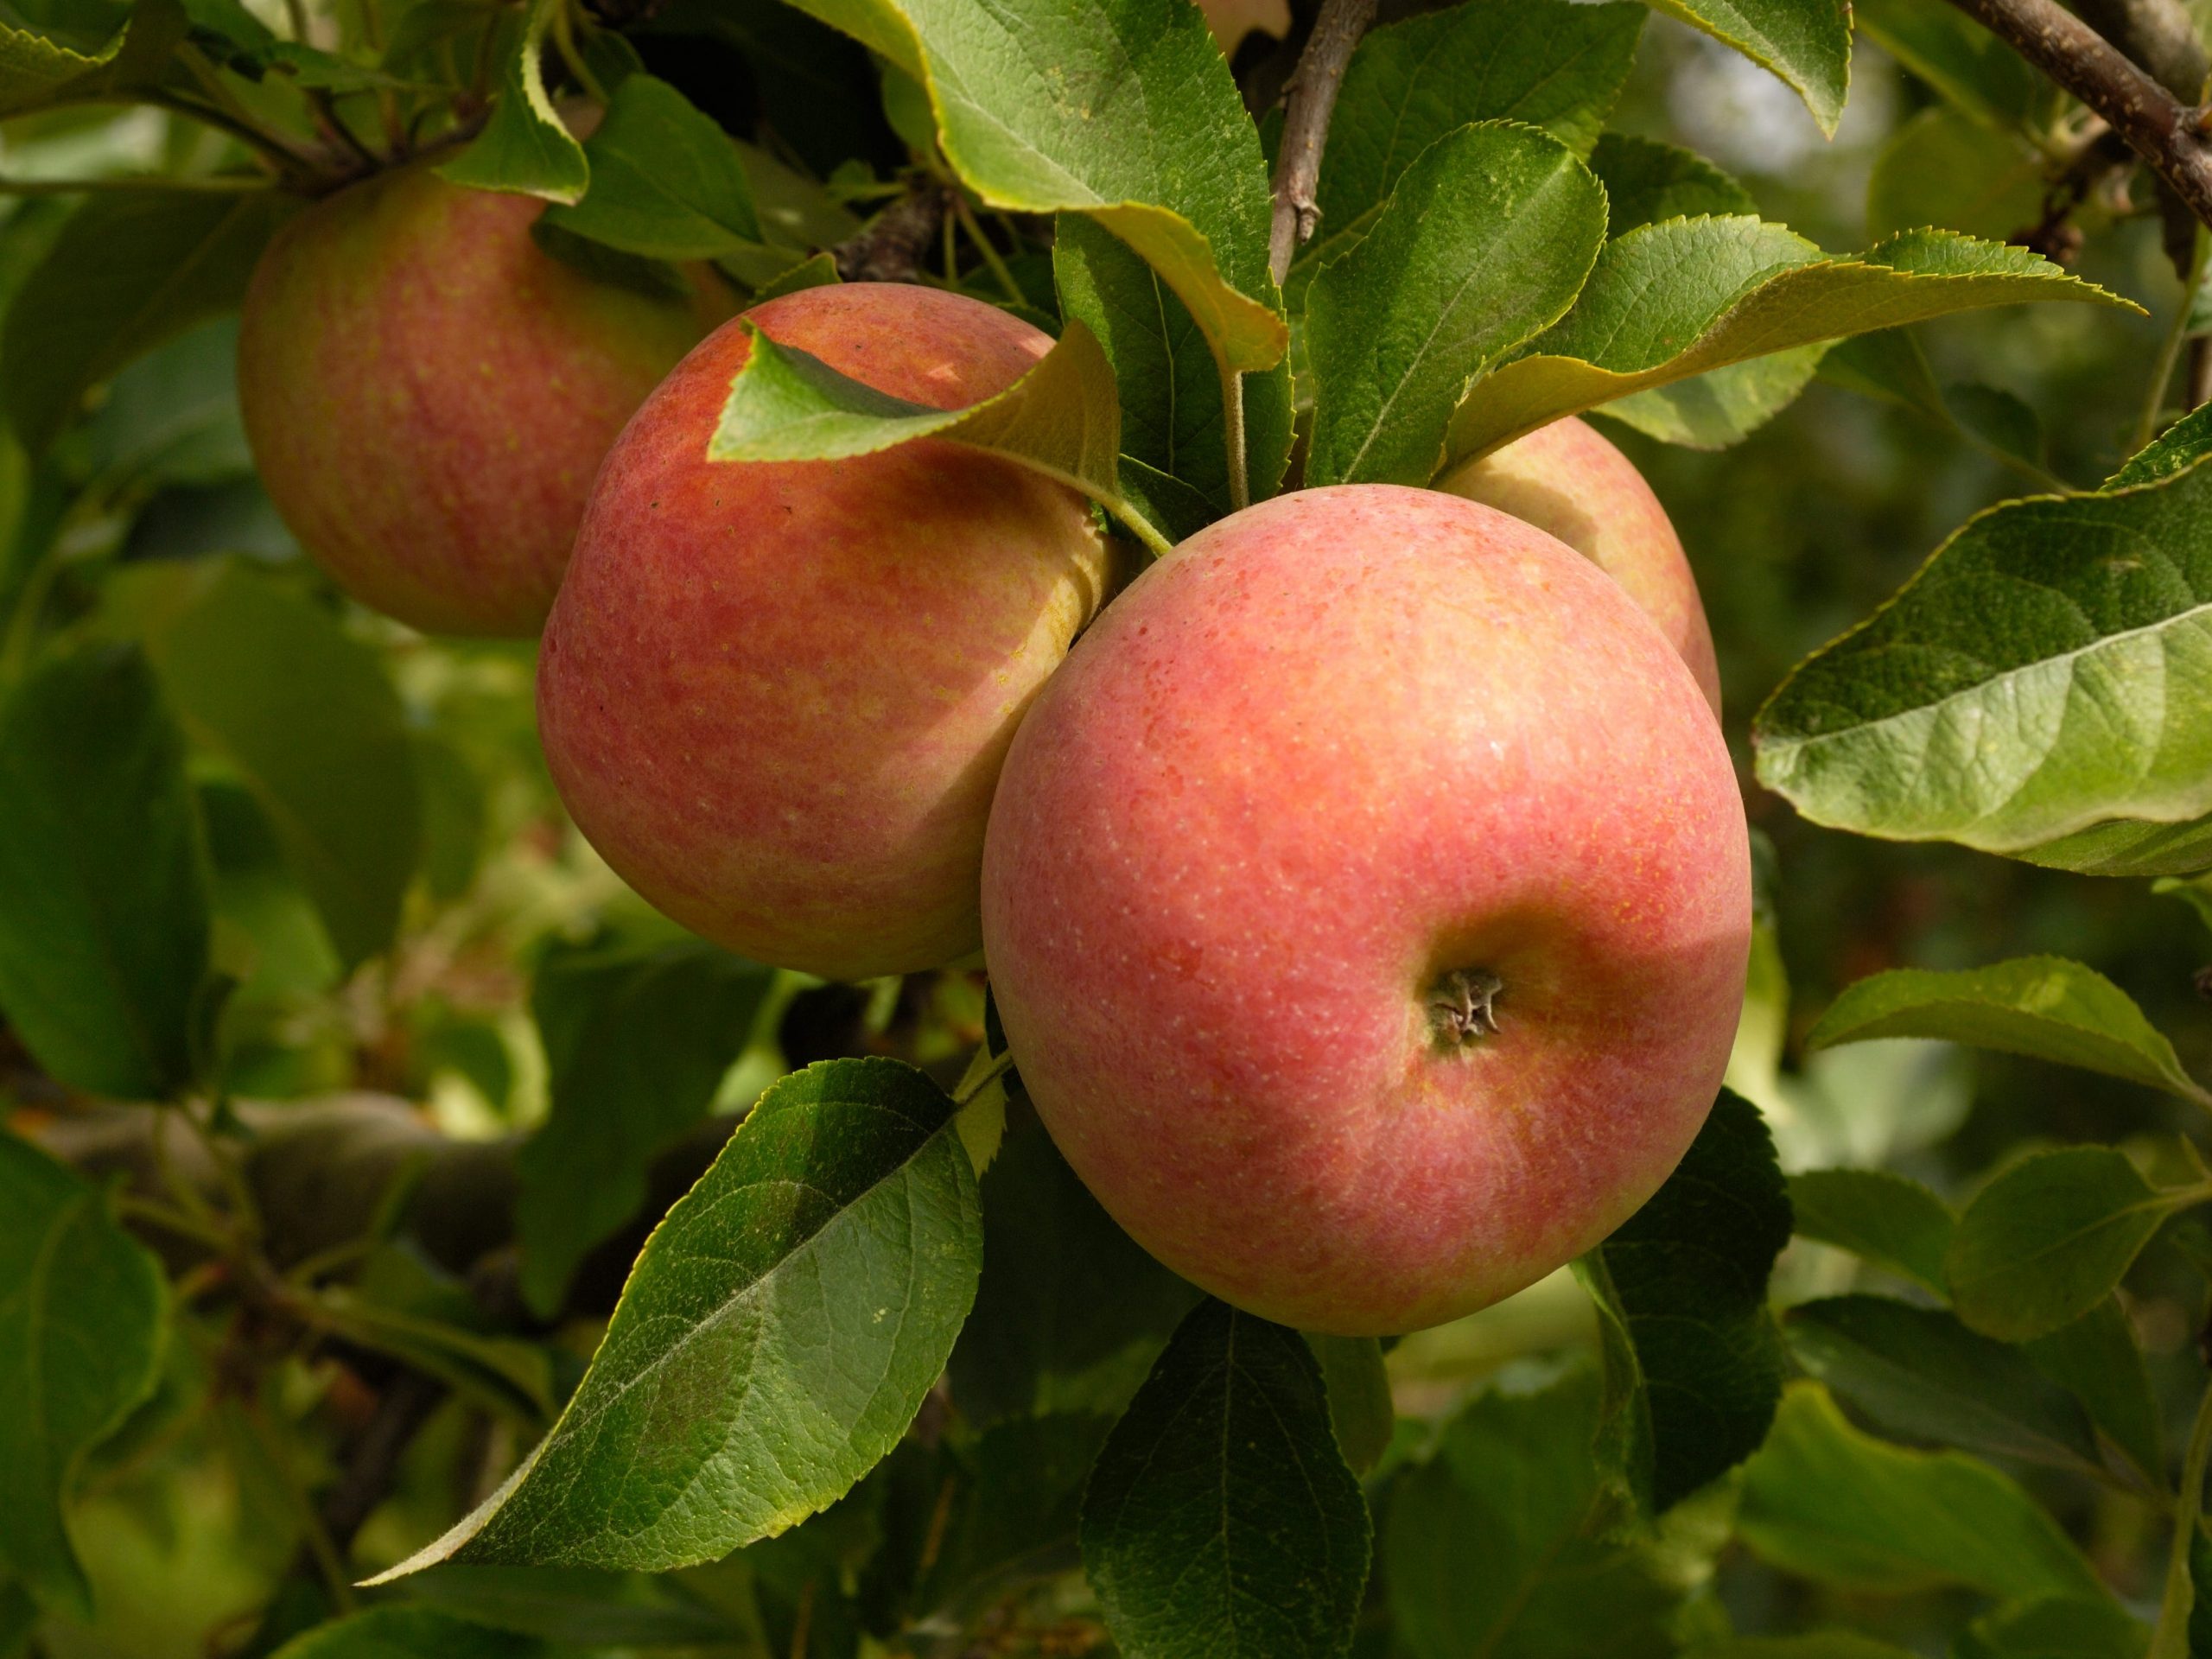 Close-up of some Fuji apples growing on a tree.